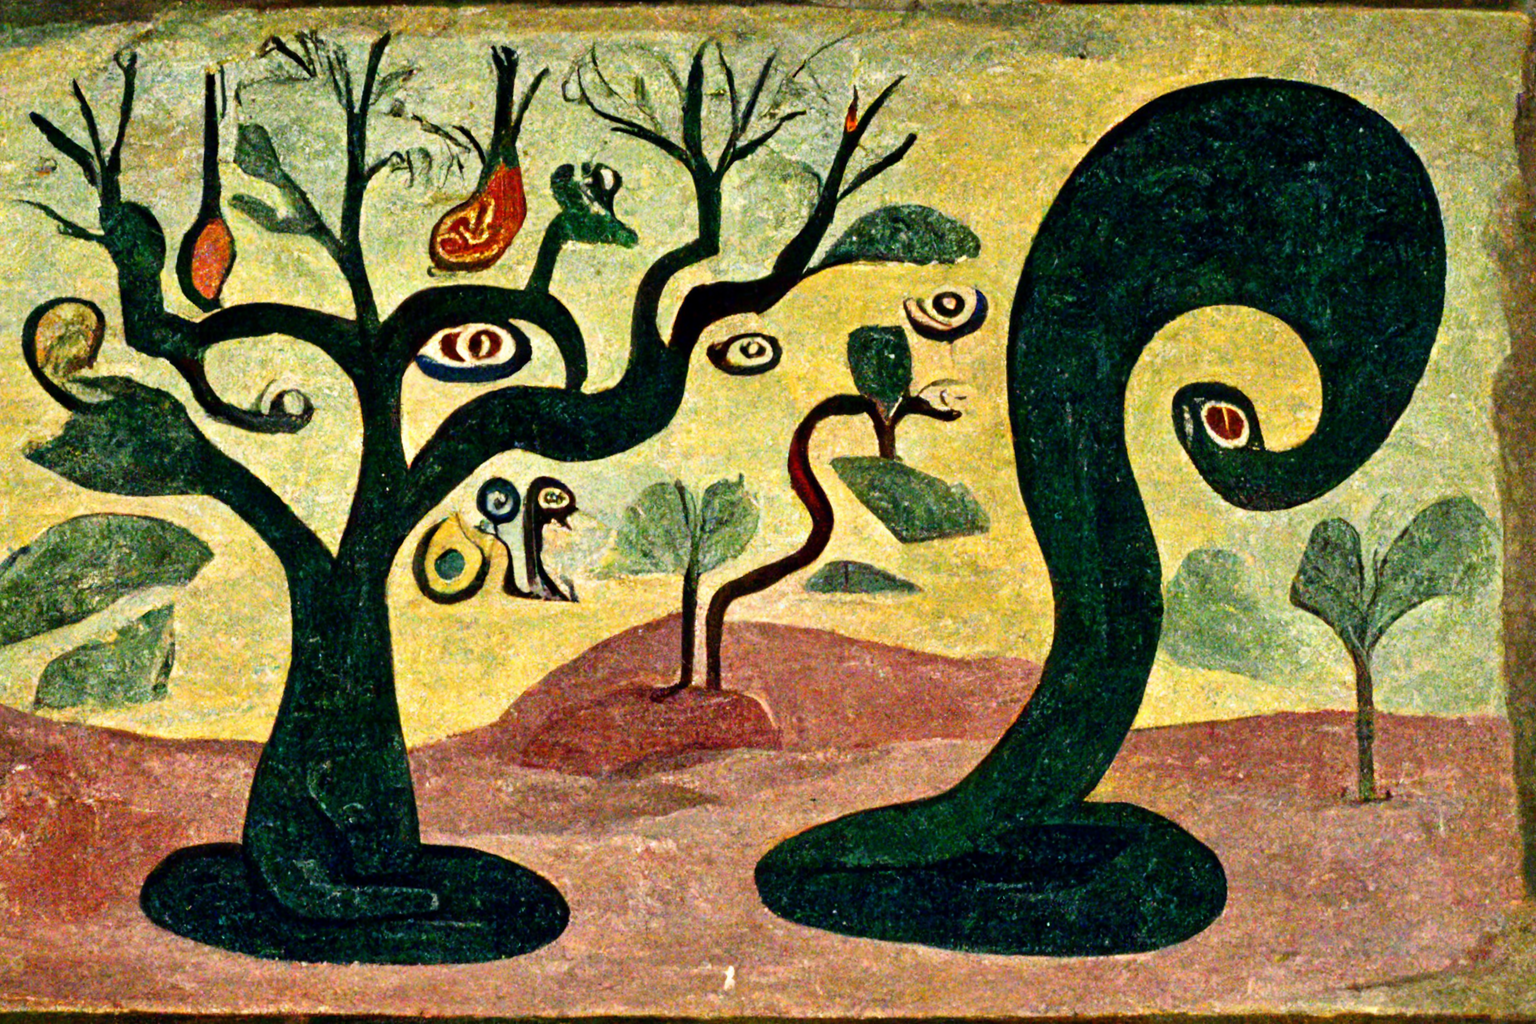 The Garden of Eden and the Tree of Good and evil